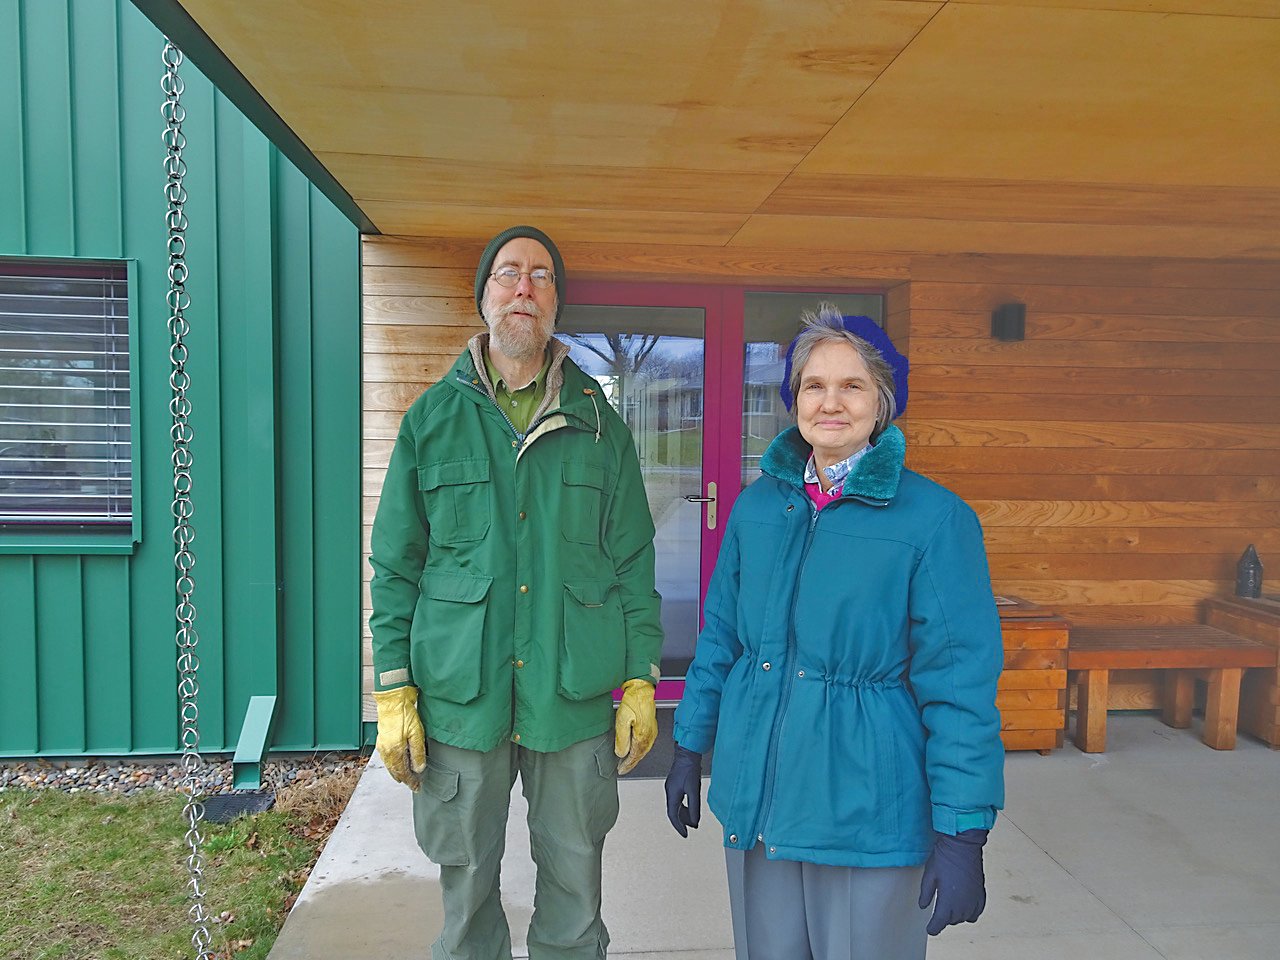 Dave Crawford and Diane Peterson stand in front of their entryway.